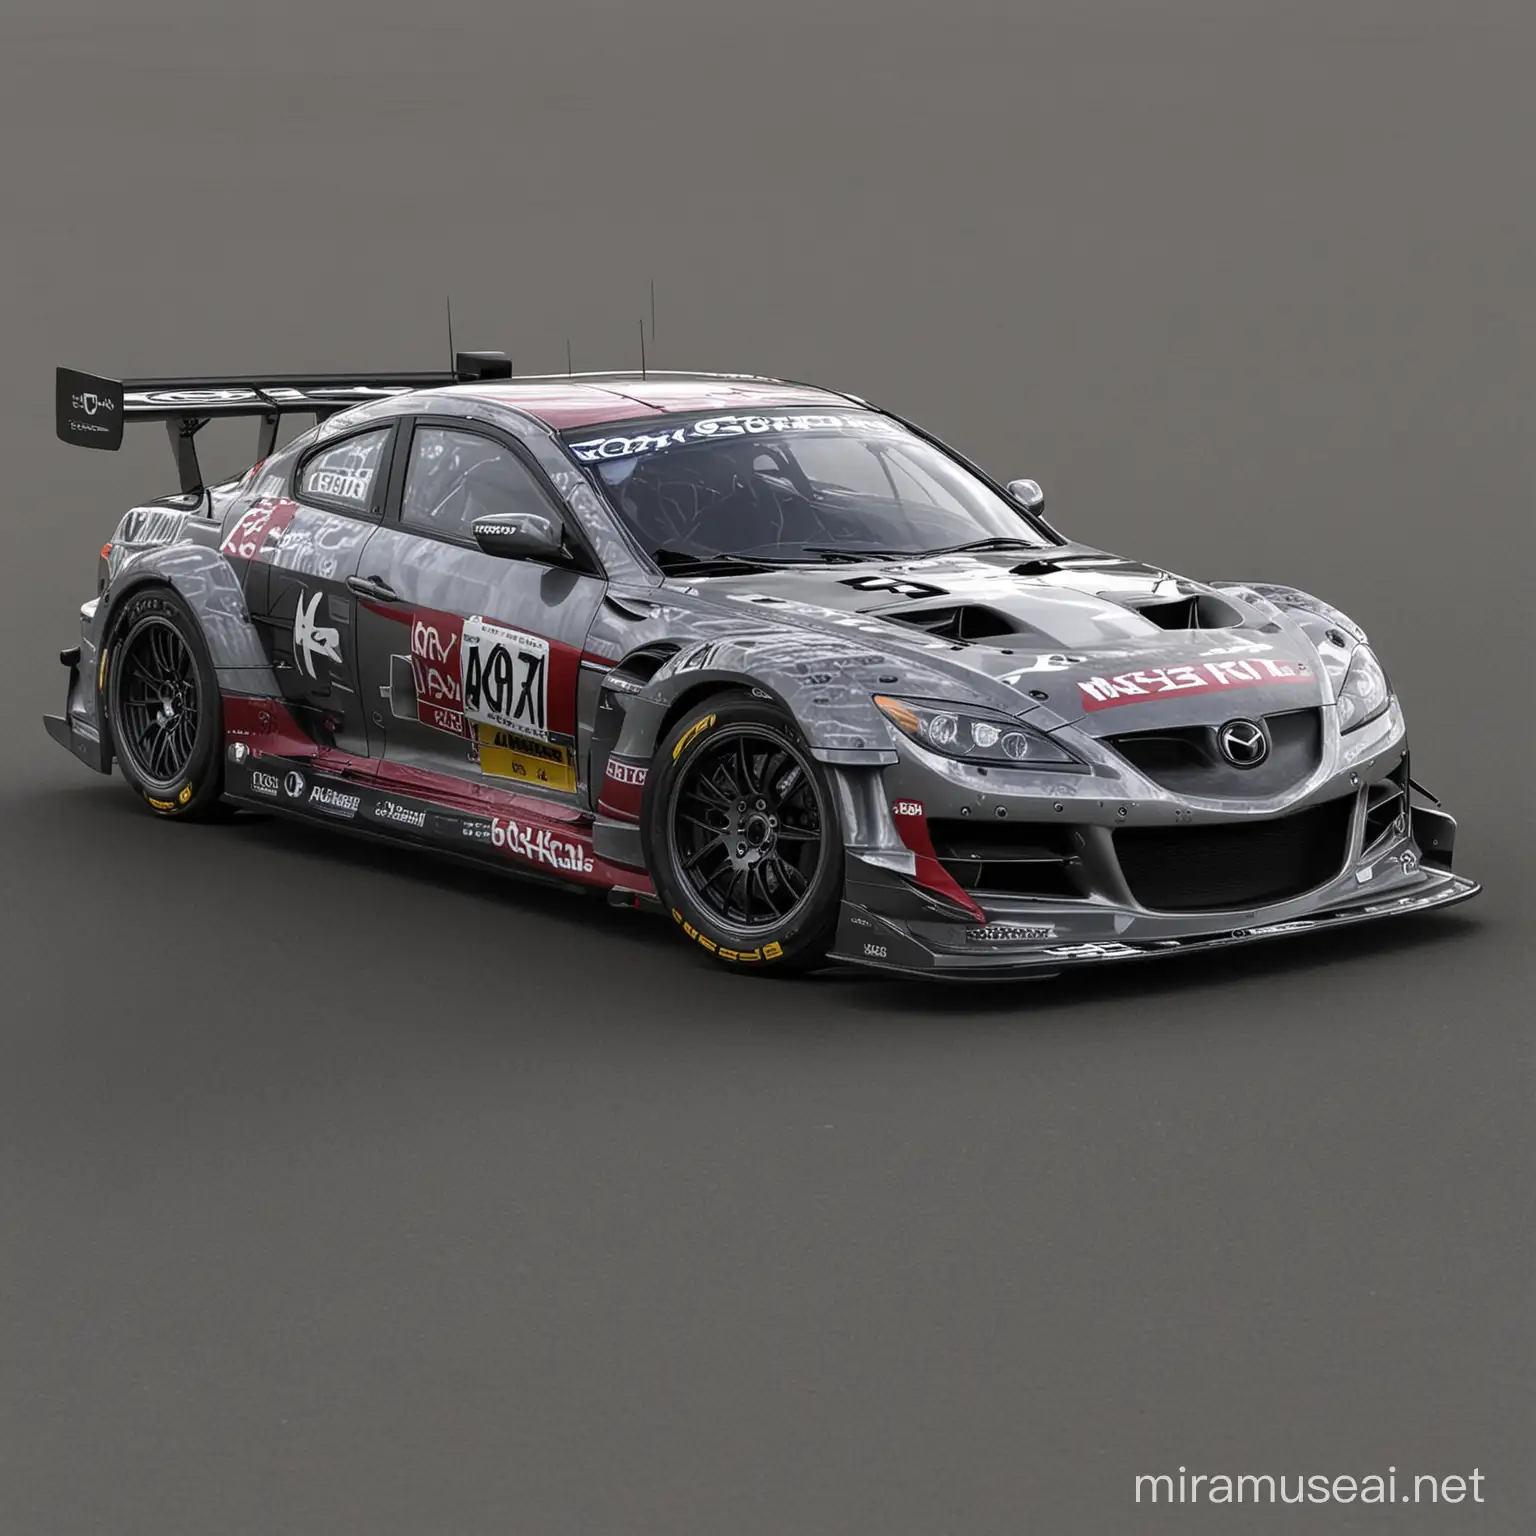 Mazda RX8 DTM Racing Car in Dynamic Action